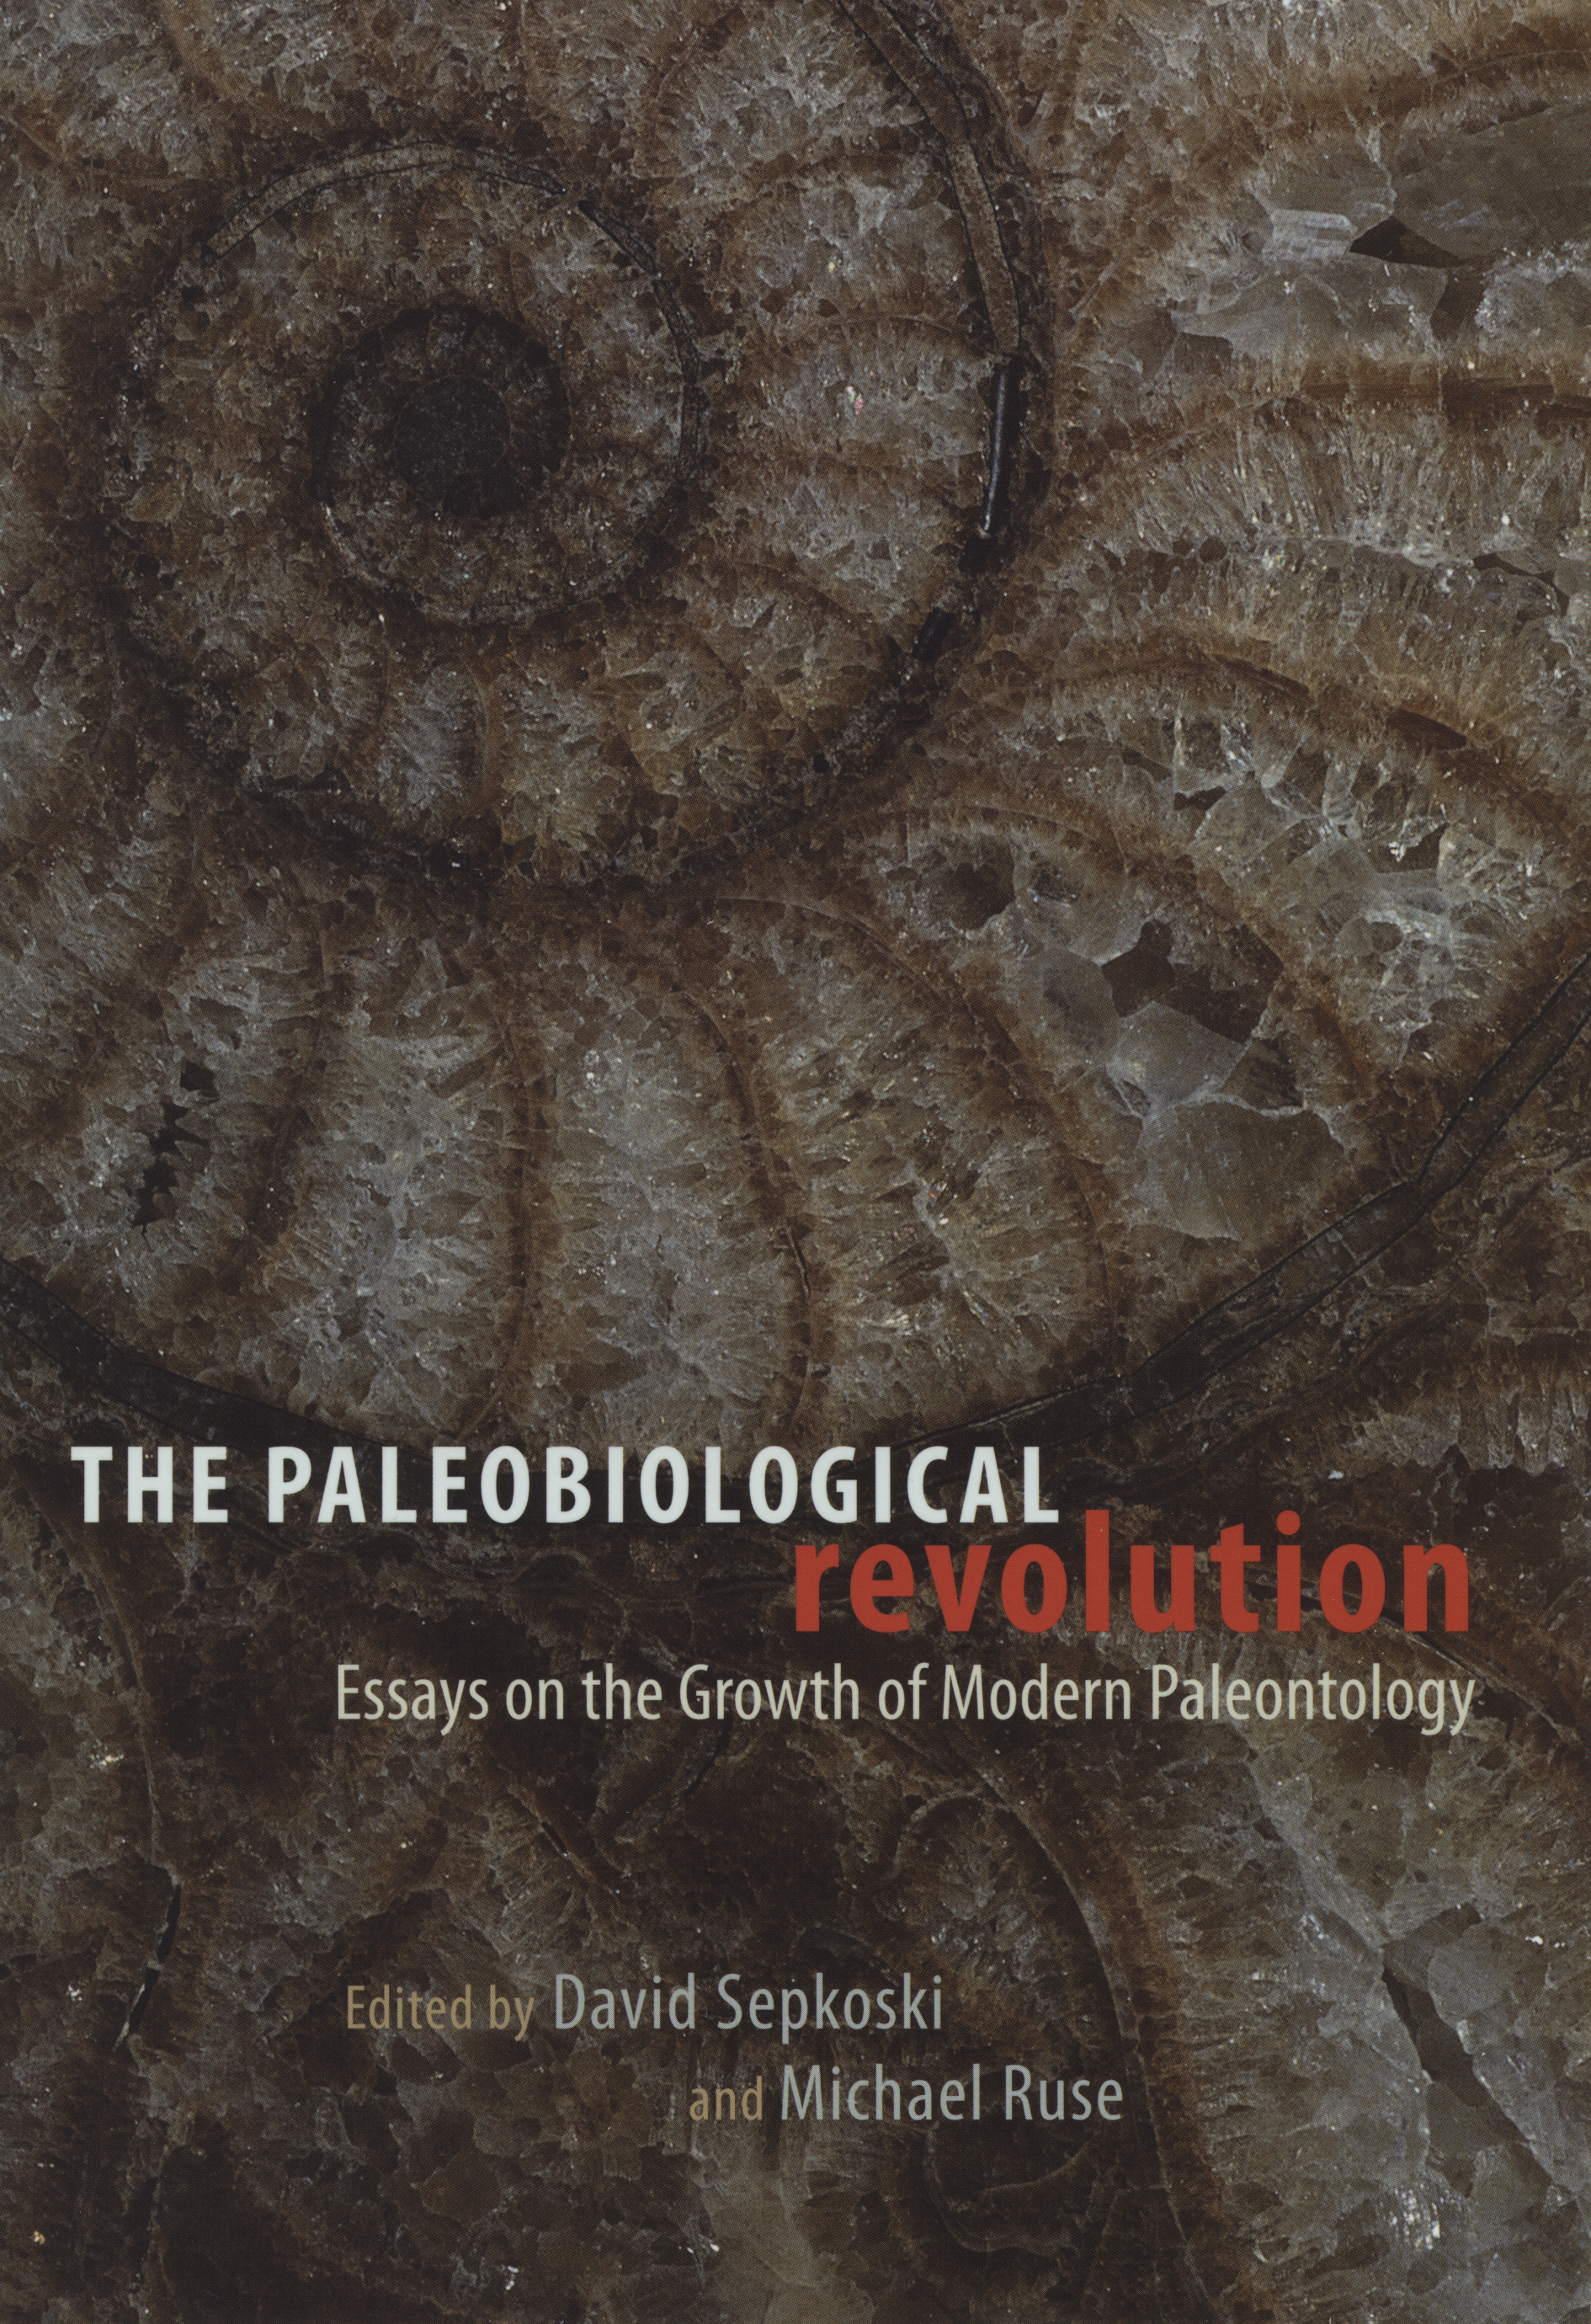 Revolutionary Fossils, Ancient Biomolecules, and Reflections in Ethics and  Decolonization: Paleoanthropology in 2019 - Schroeder - 2020 - American  Anthropologist - Wiley Online Library